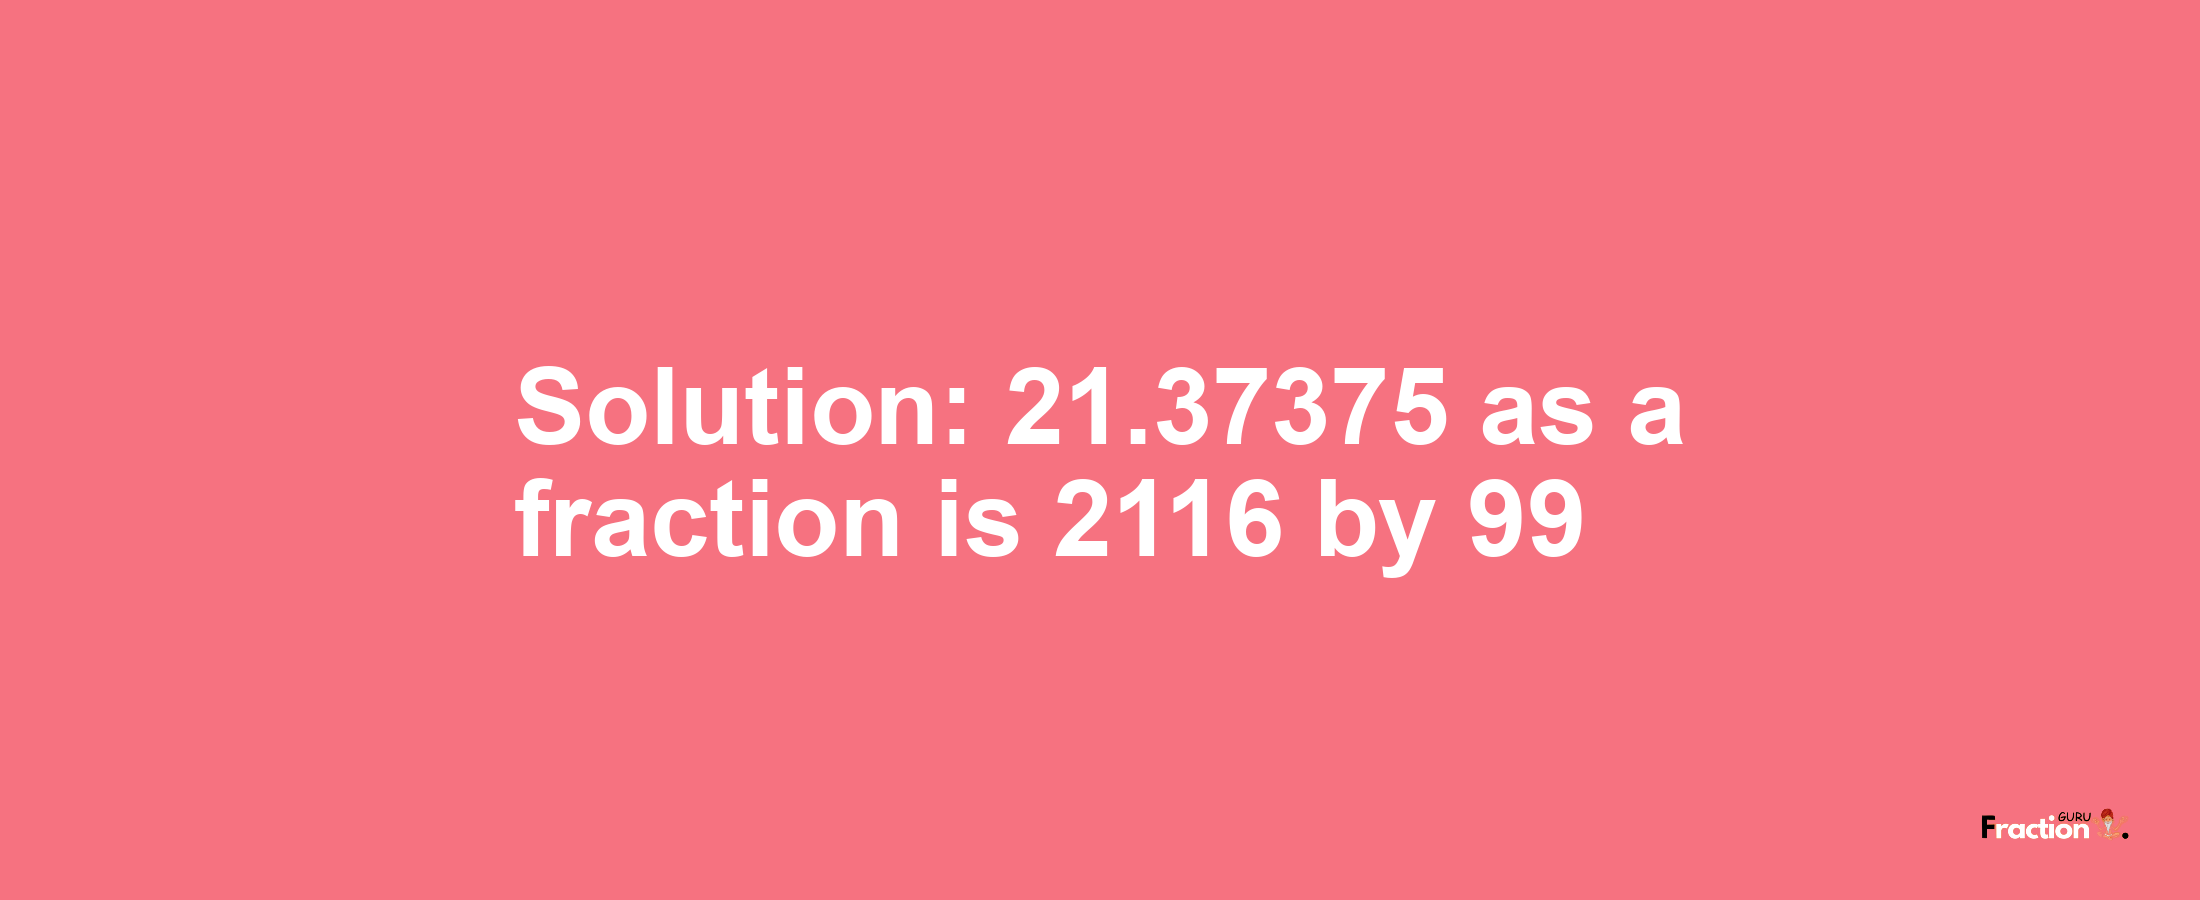 Solution:21.37375 as a fraction is 2116/99